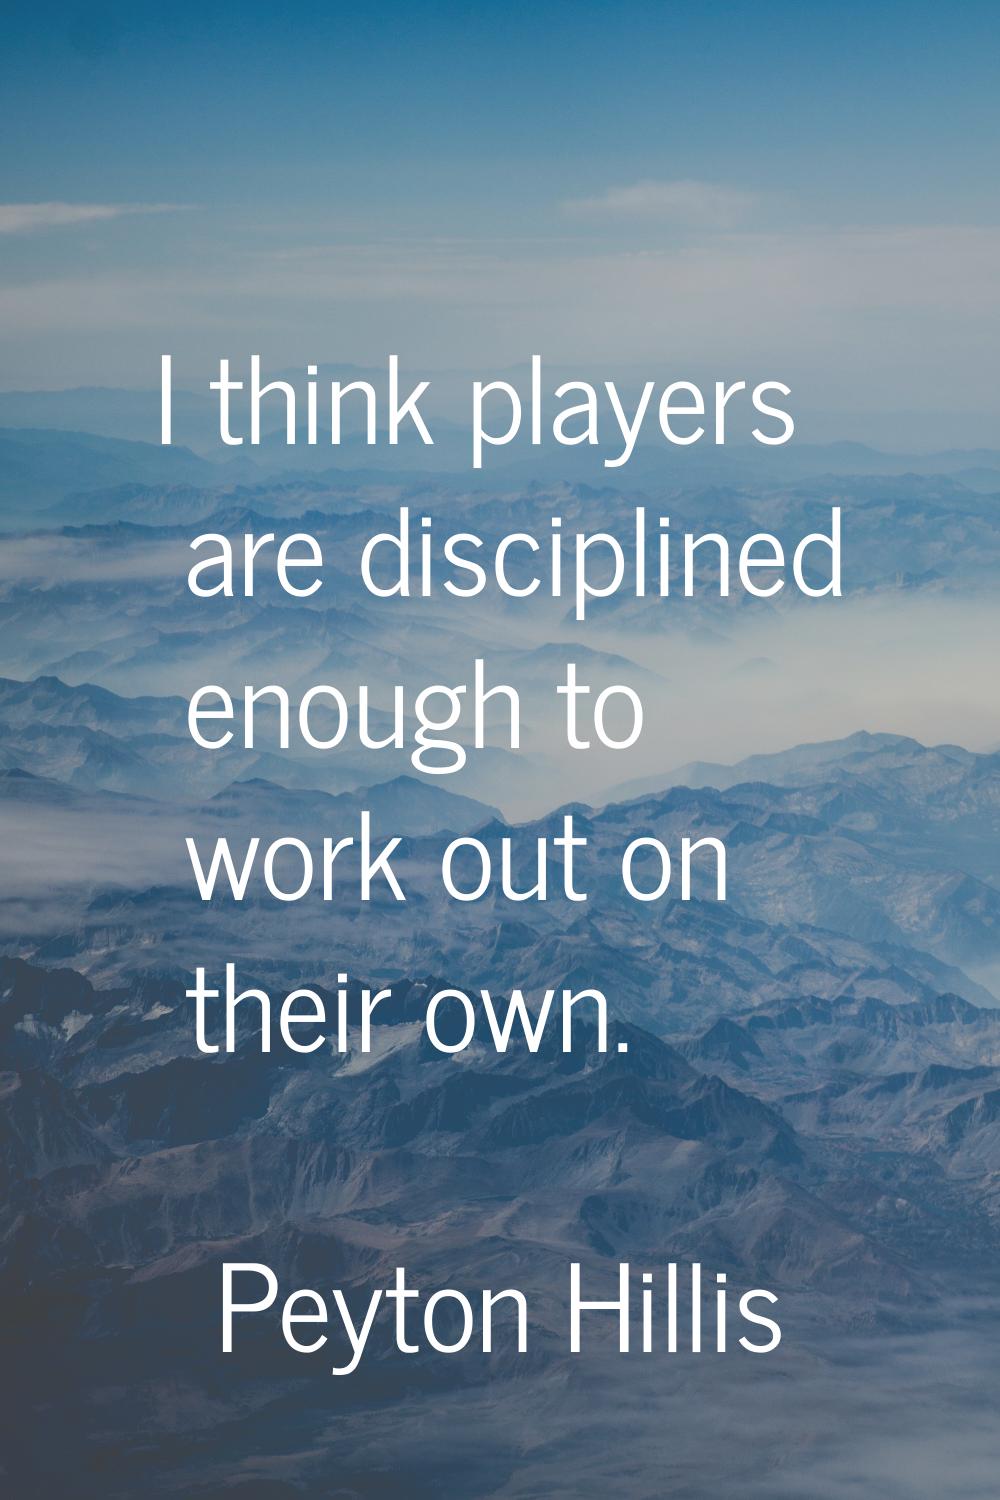 I think players are disciplined enough to work out on their own.